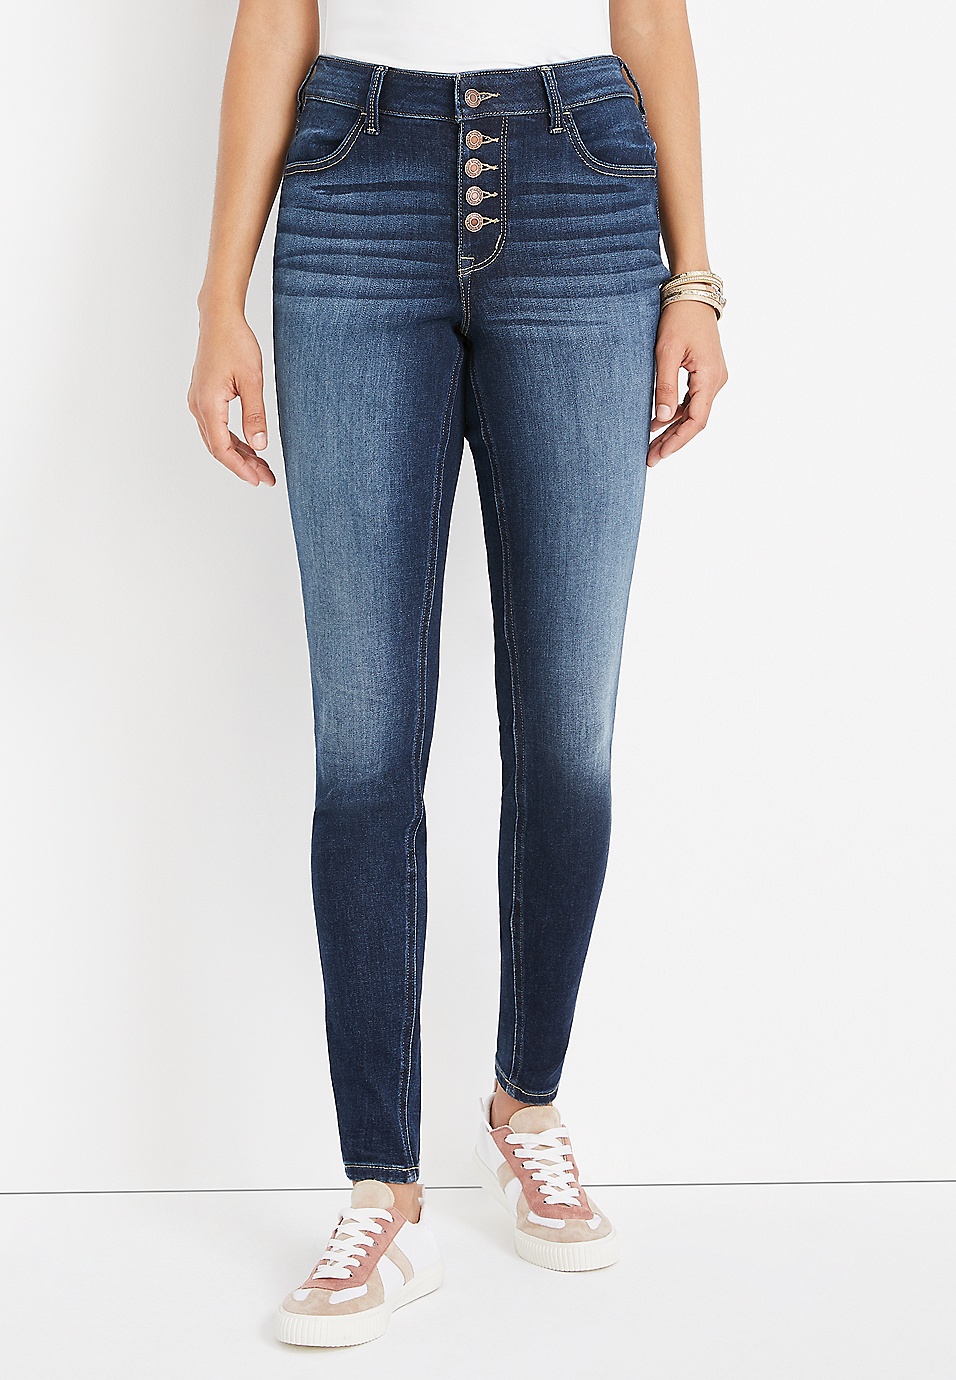 m jeans maurices™ Cool High Fly Jegging | maurices